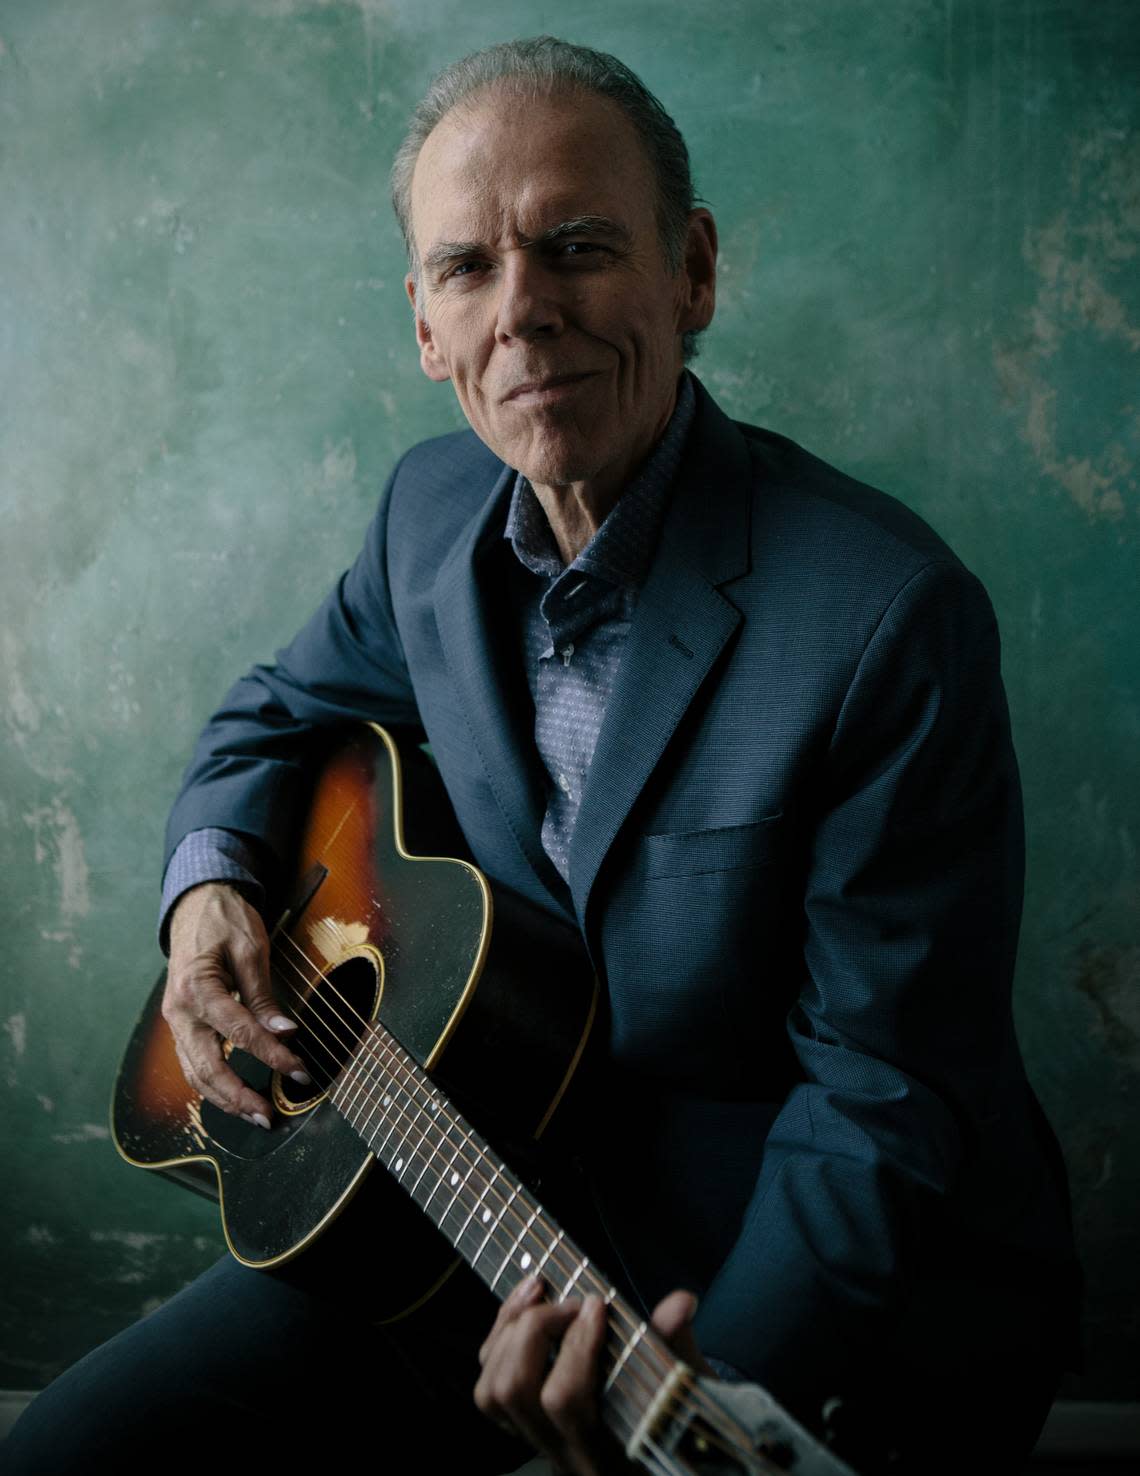 John Hiatt will perform at the Lexington Opera House Aug. 14 with his band, The Goners and featuring Sonny Landreth.